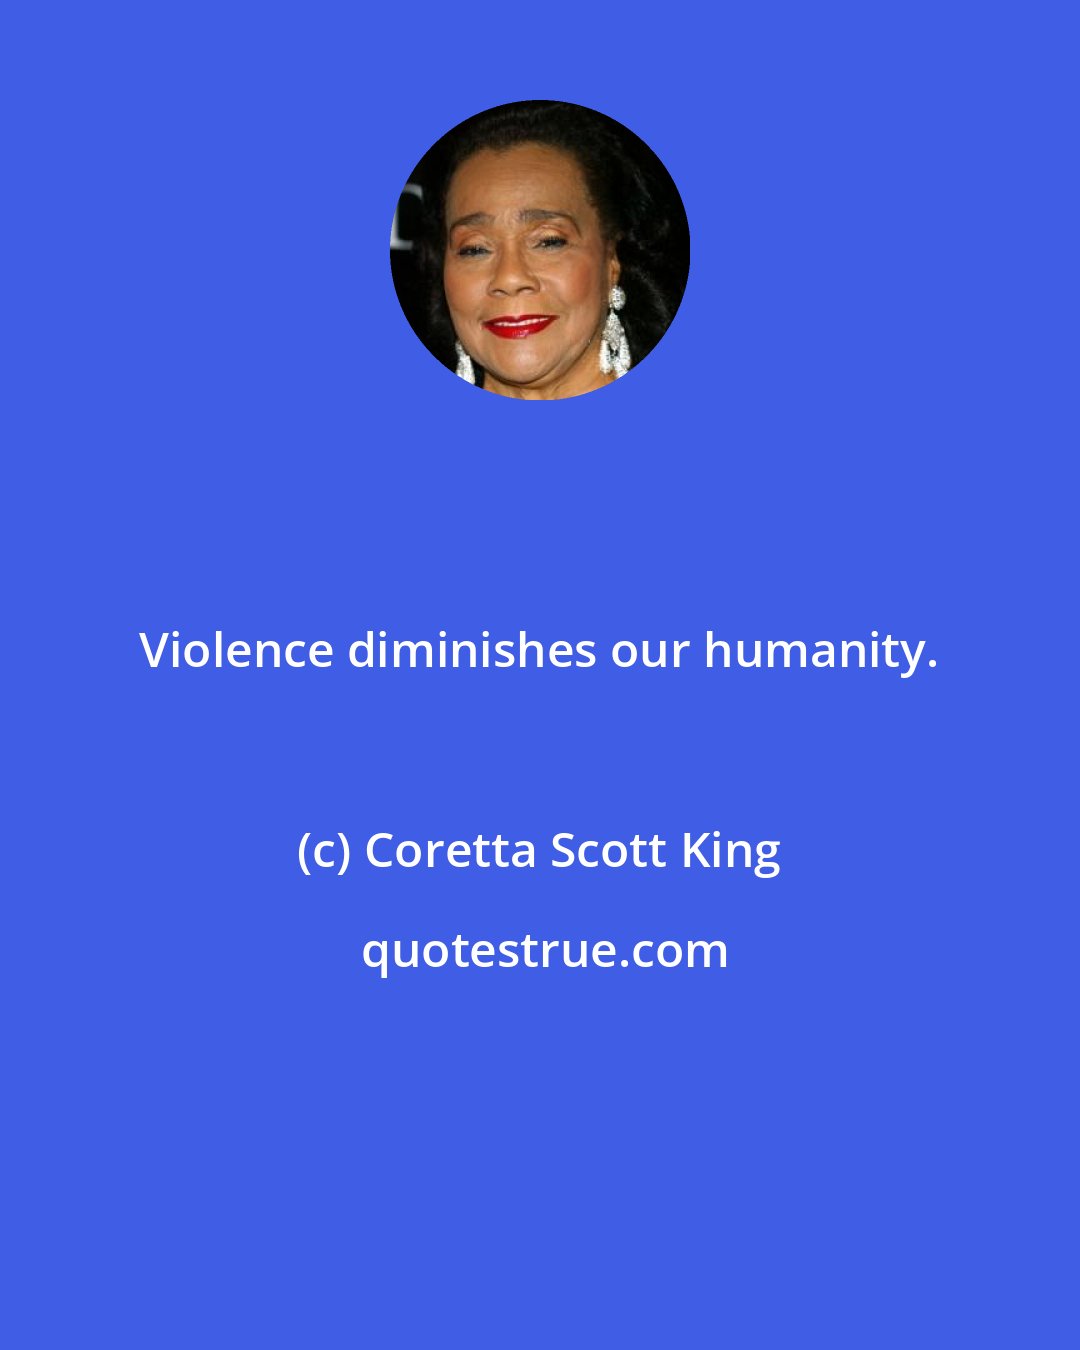 Coretta Scott King: Violence diminishes our humanity.